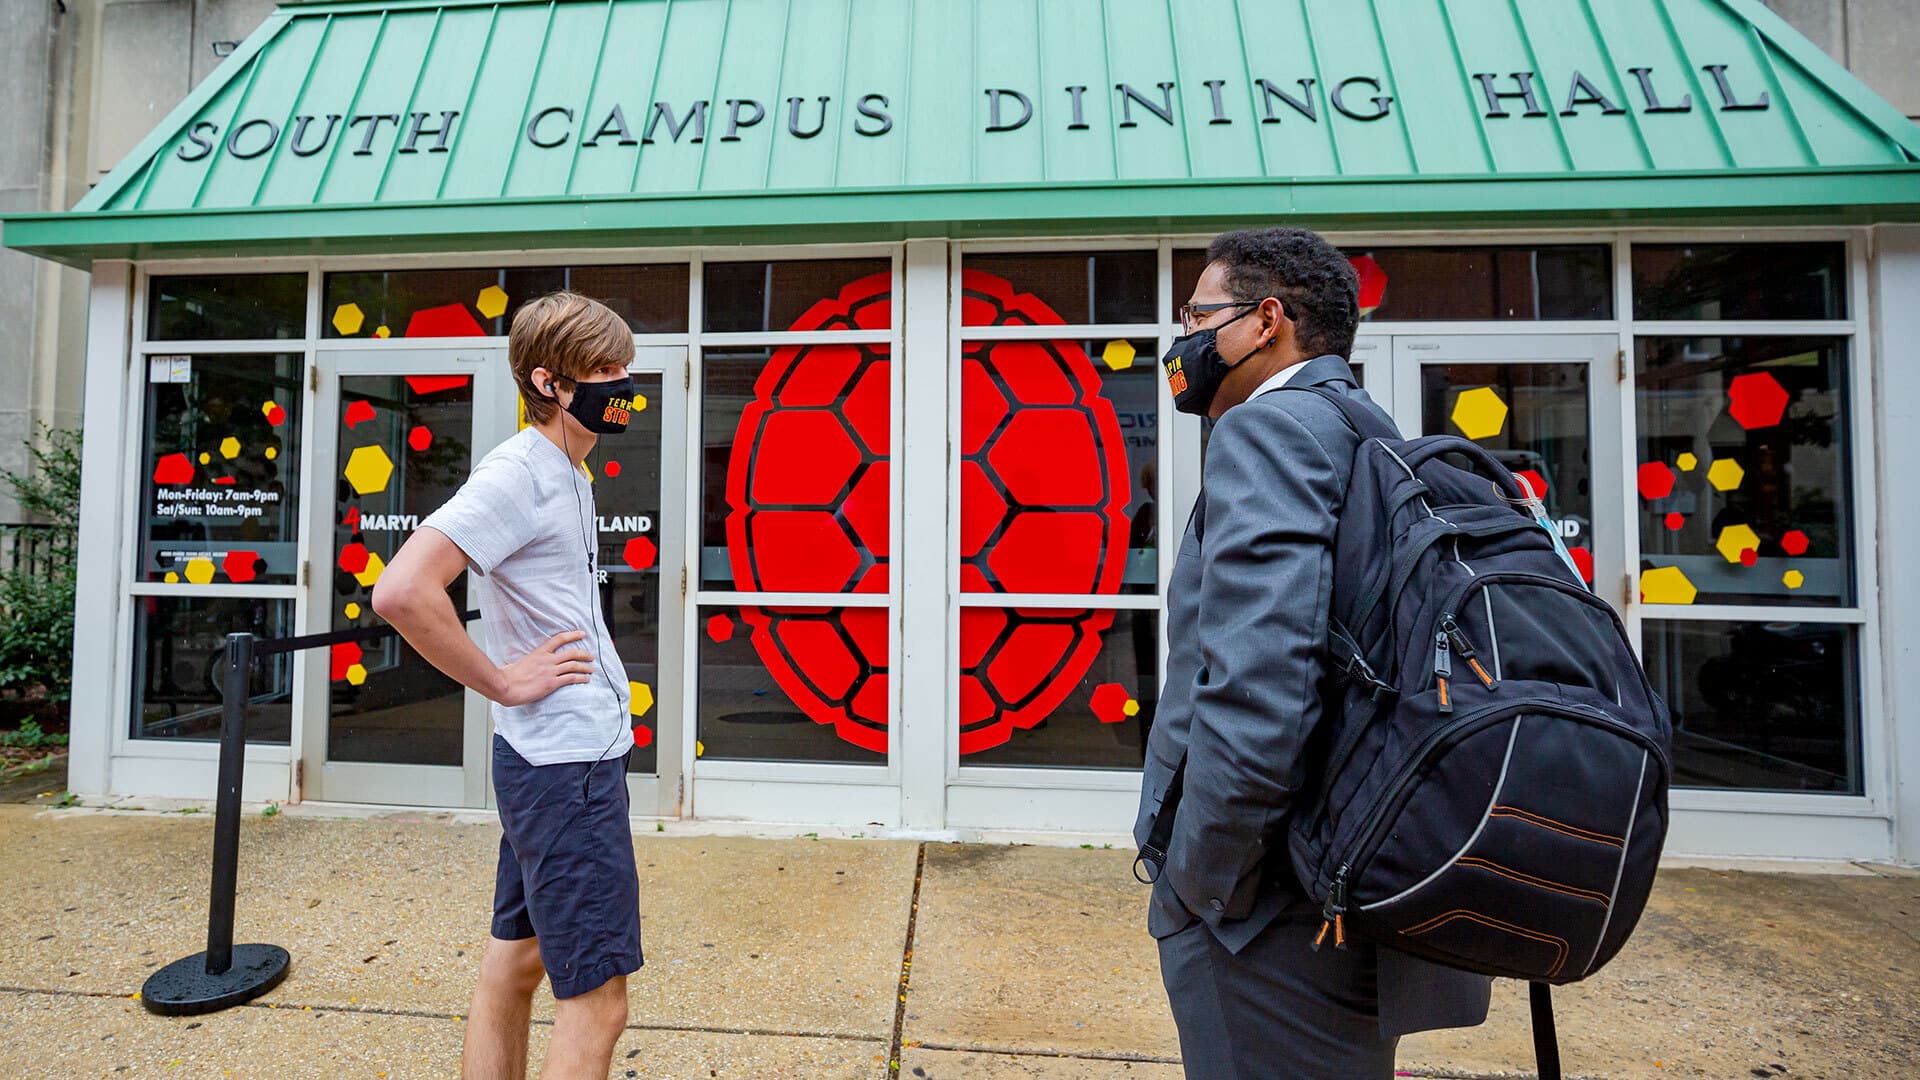 President Darryll J. Pines talks to a student outside South Campus Dining Hall